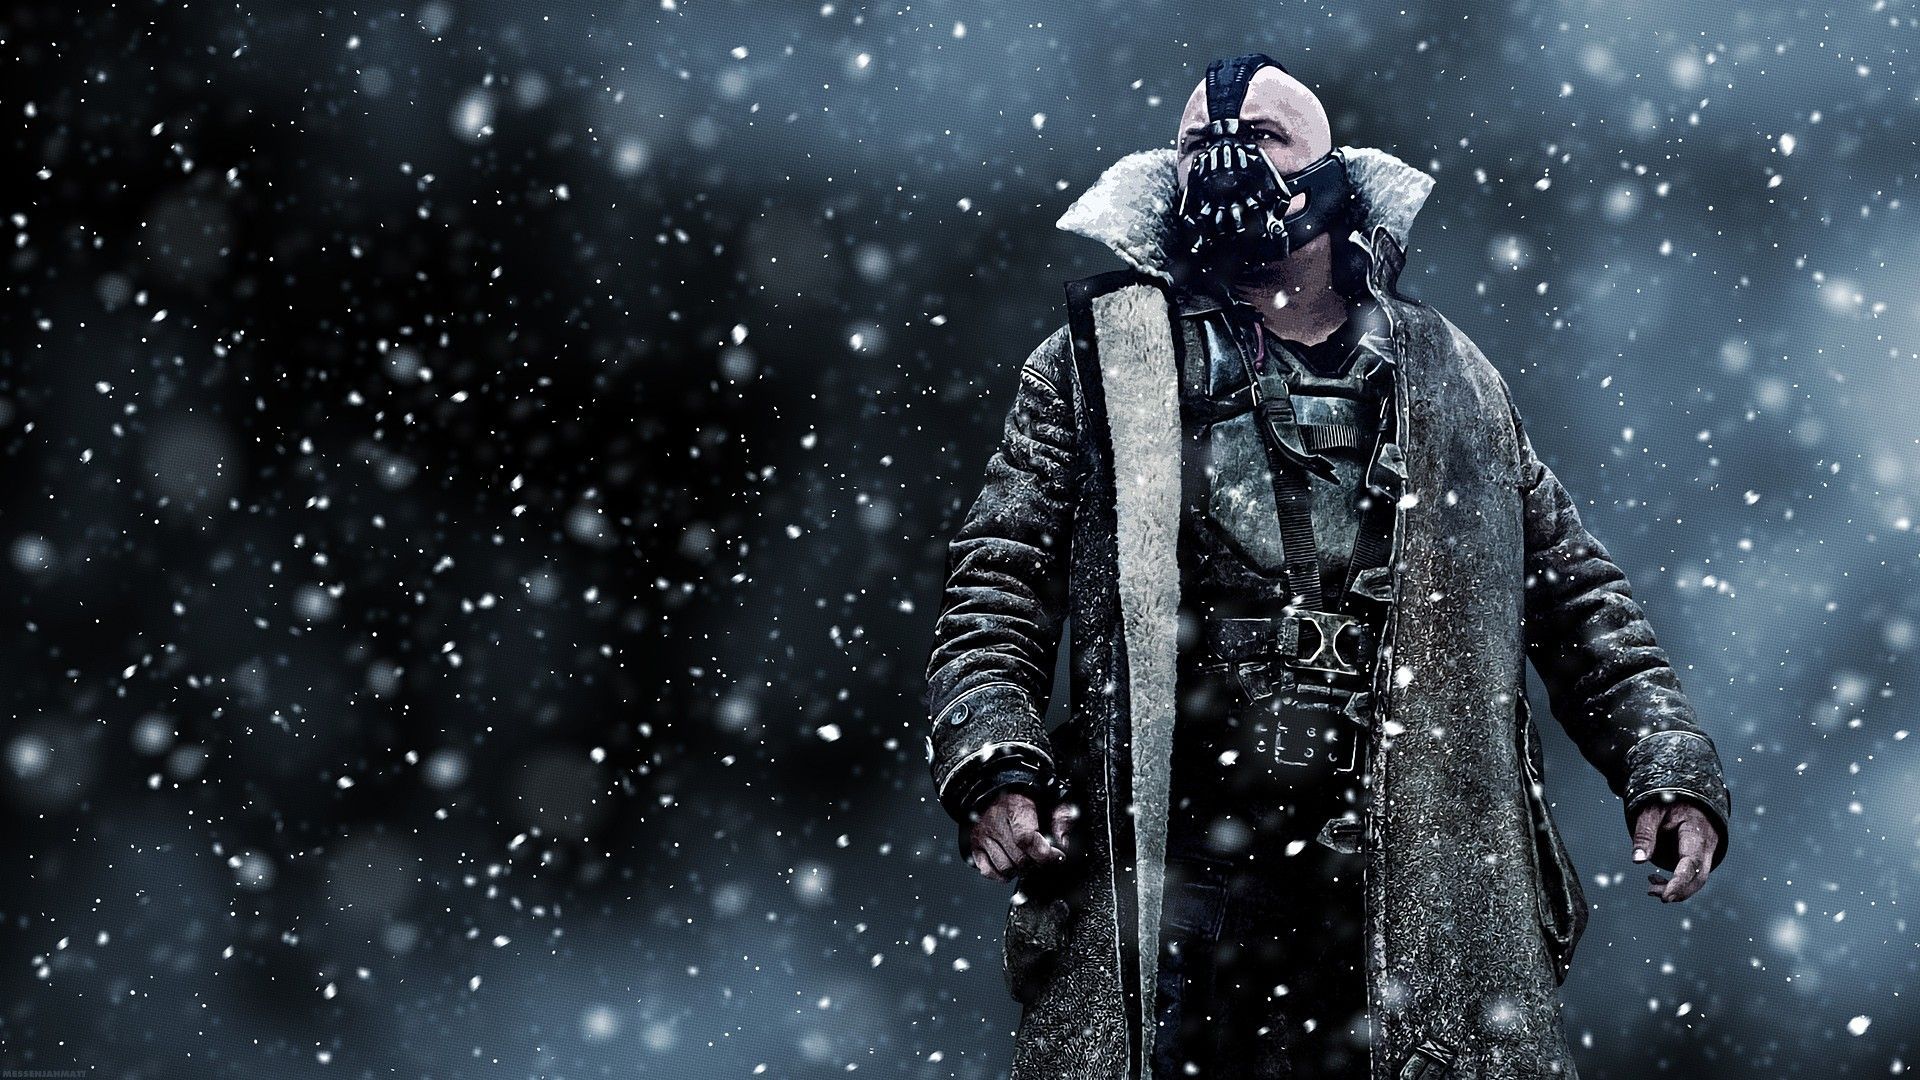 80+ Bane (DC Comics) HD Wallpapers and Backgrounds